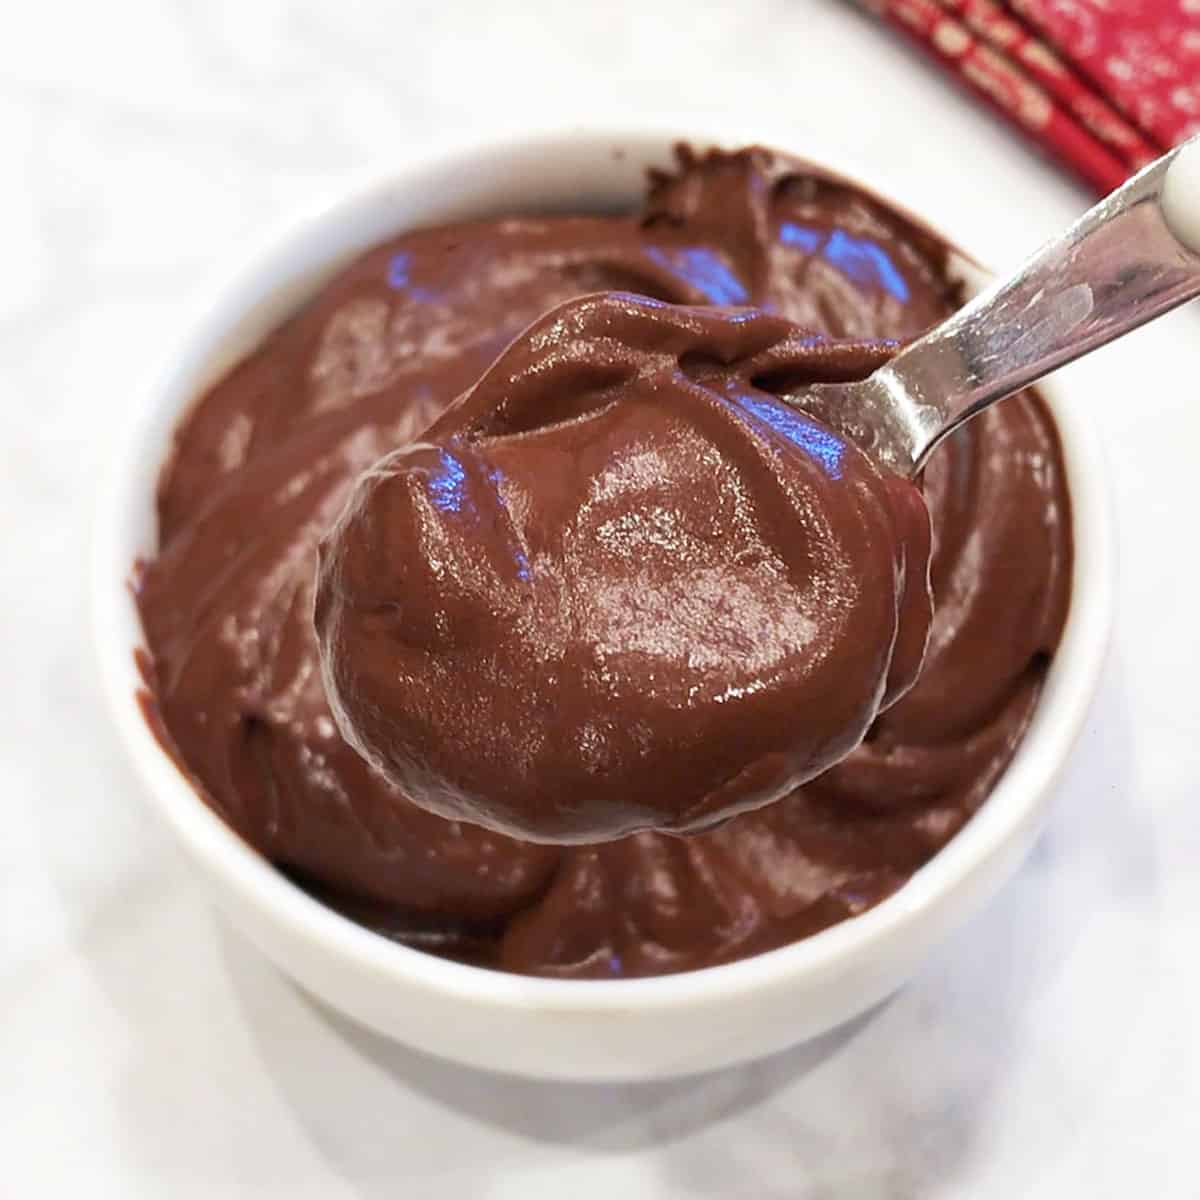 Avocado chocolate mousse is served.